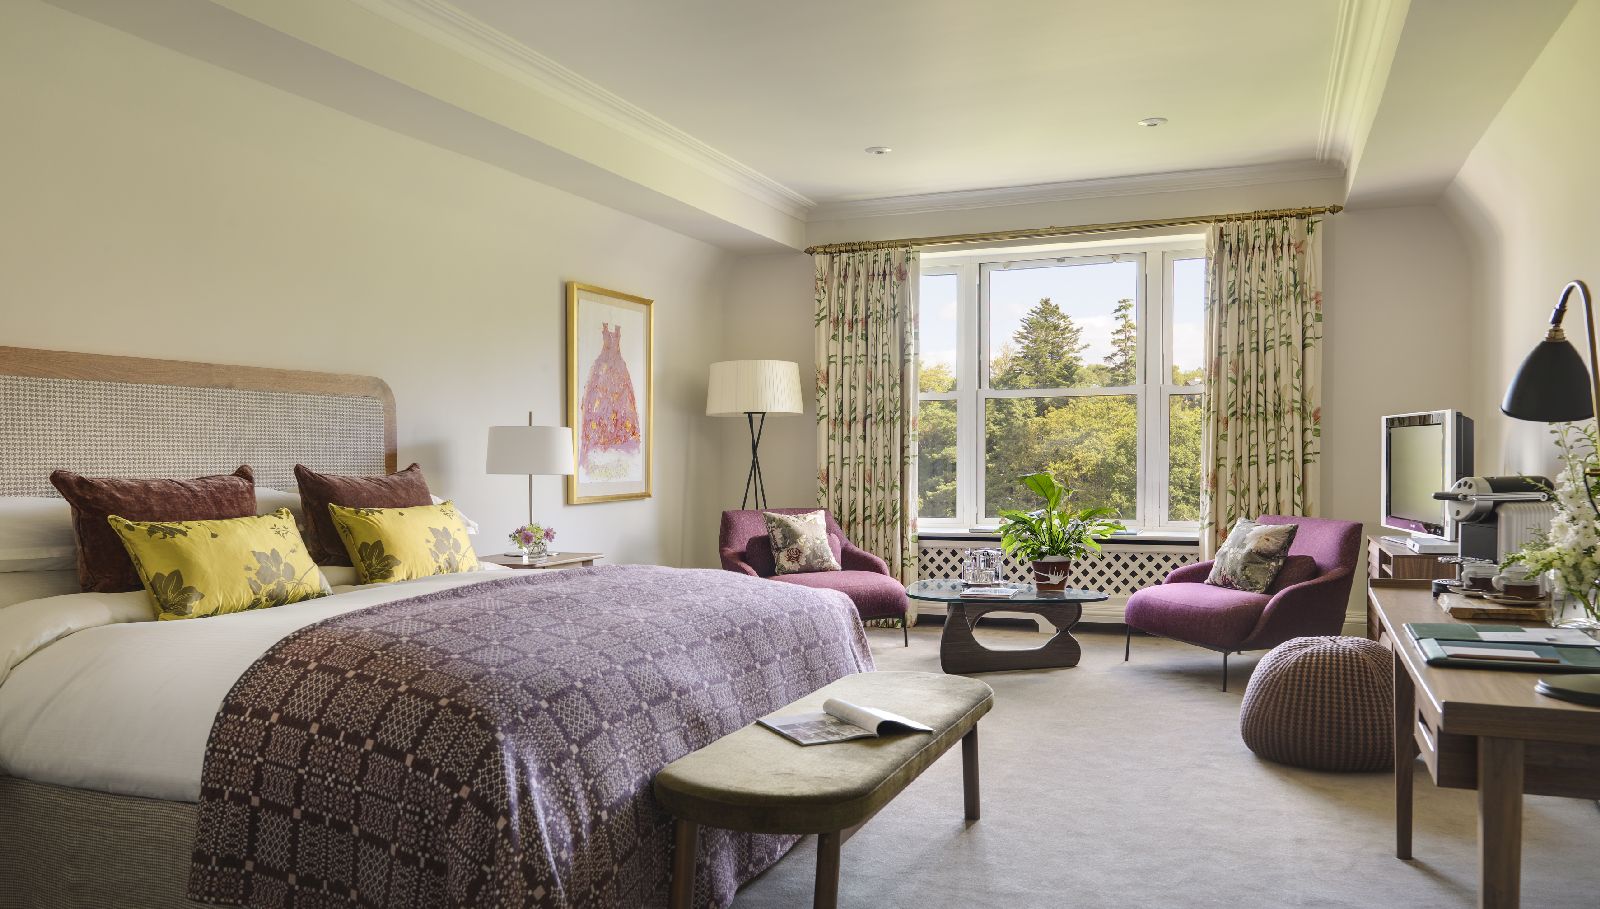 A superior deluxe room at Sheen Falls Lodge in Kerry Ireland